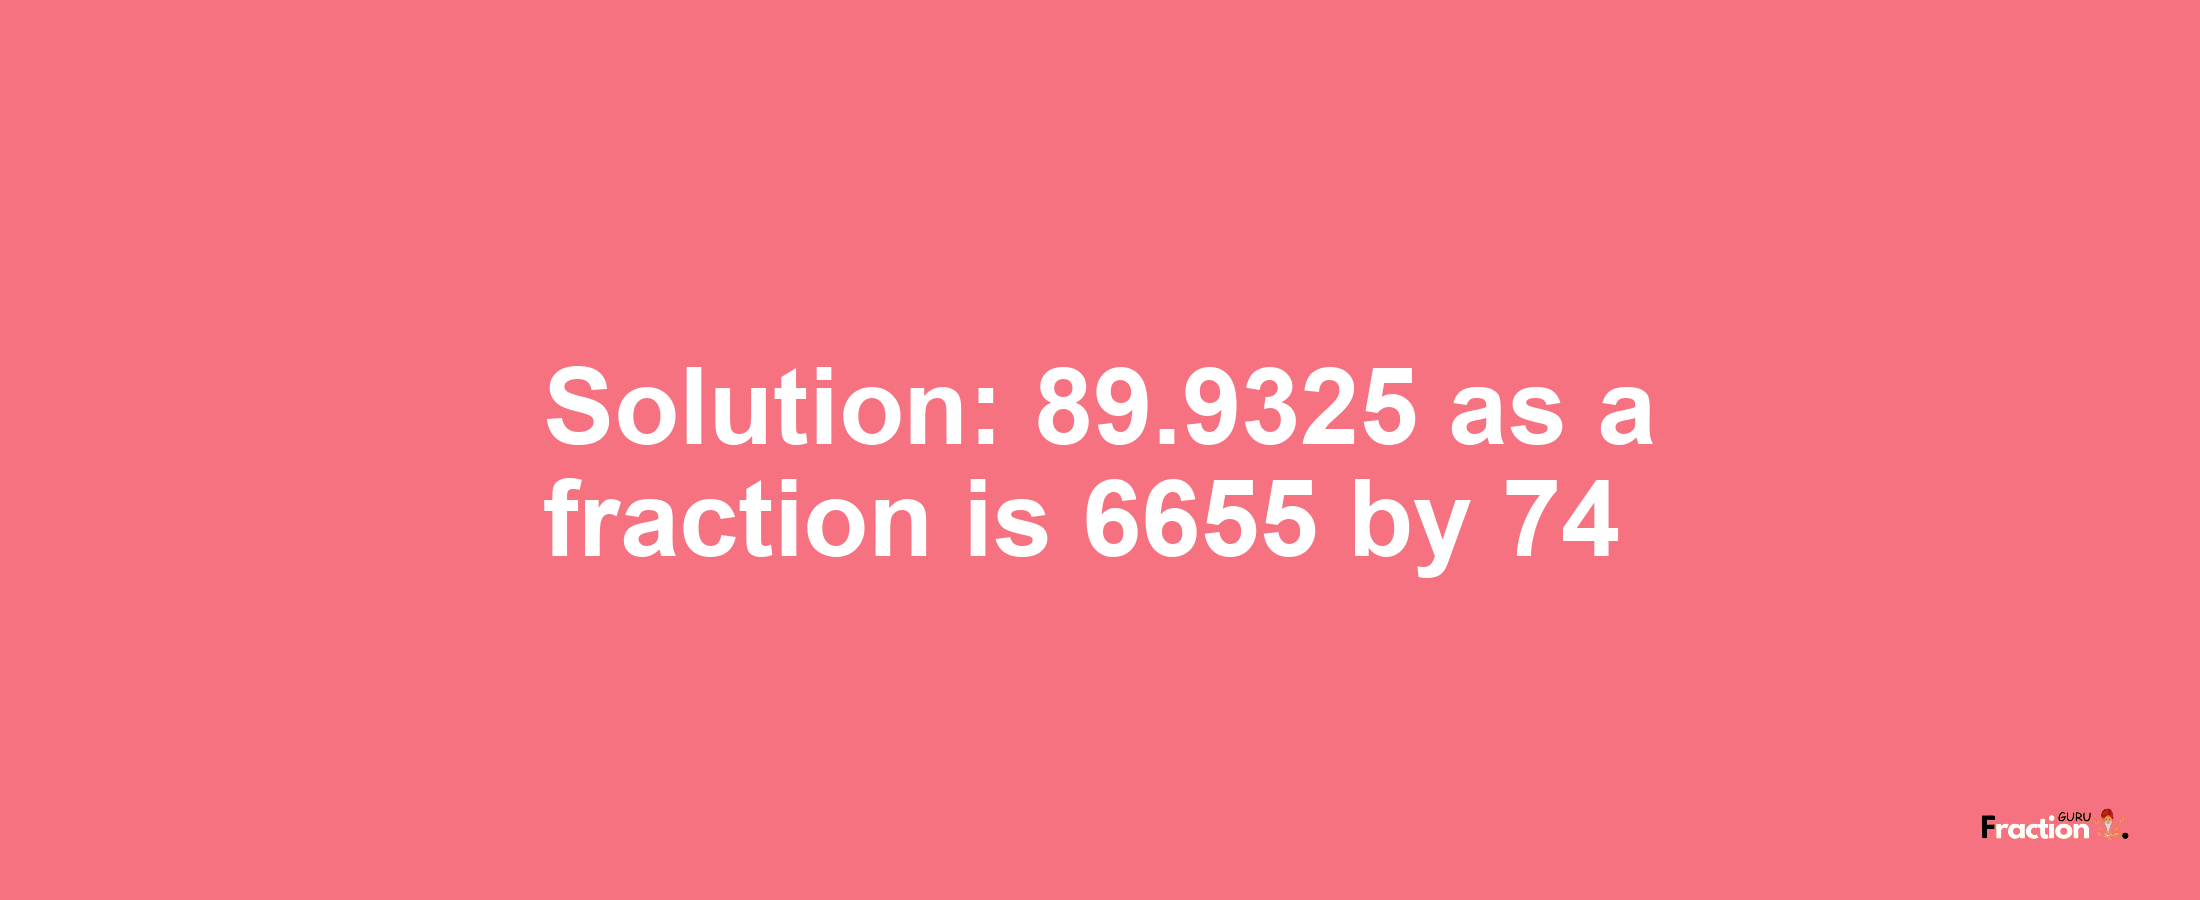 Solution:89.9325 as a fraction is 6655/74